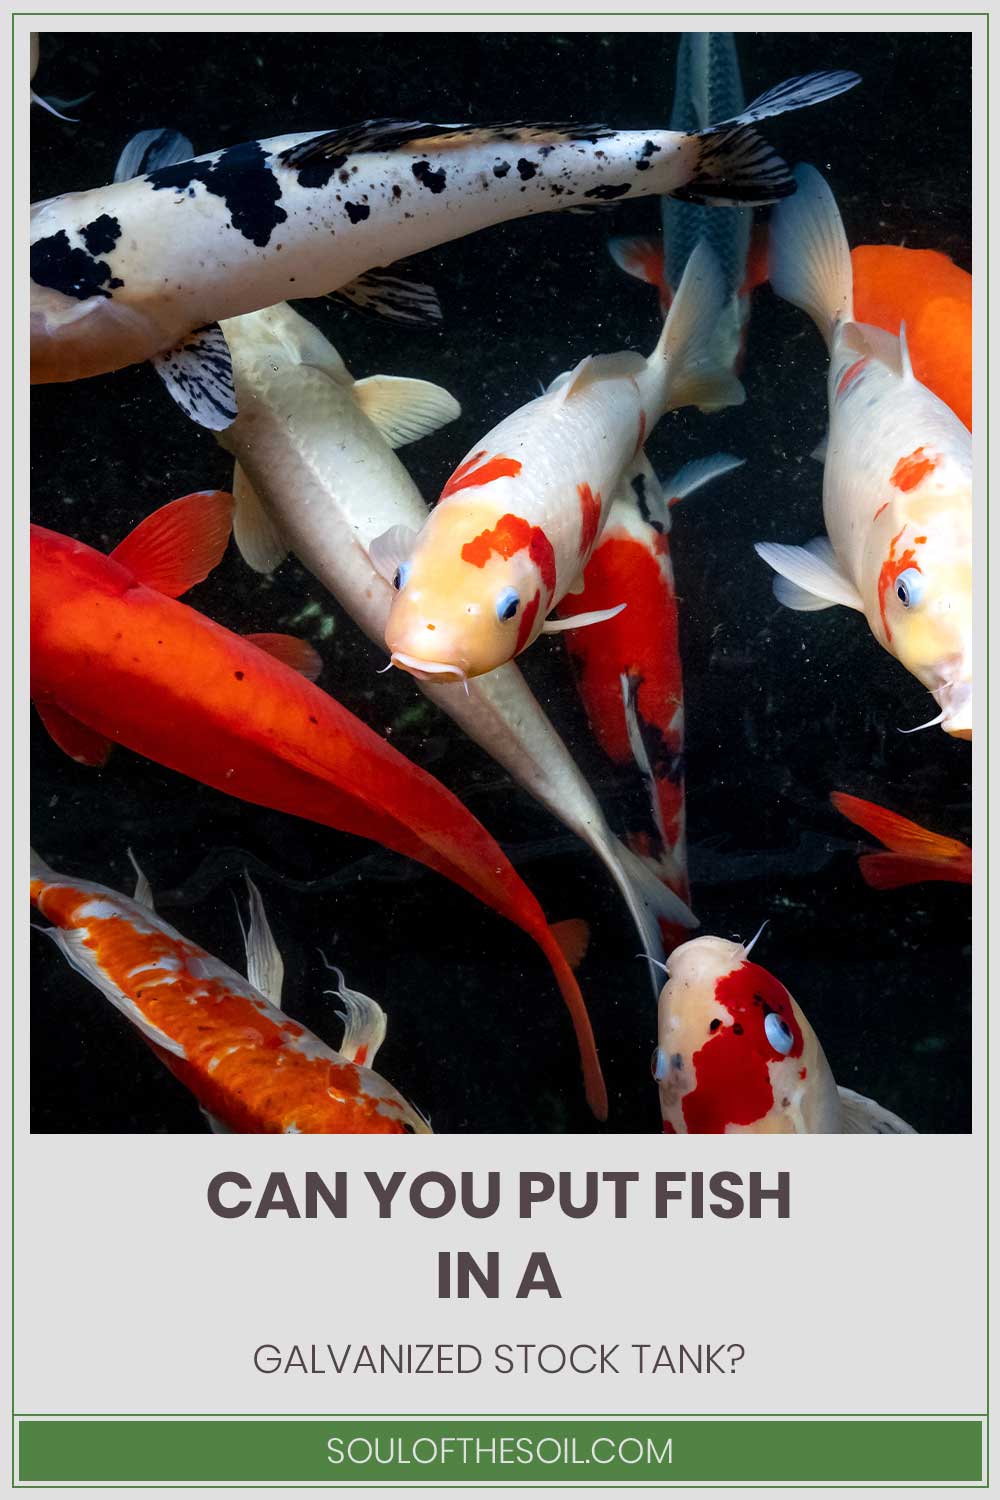 Can You Put Fish In A Galvanized Stock Tank?